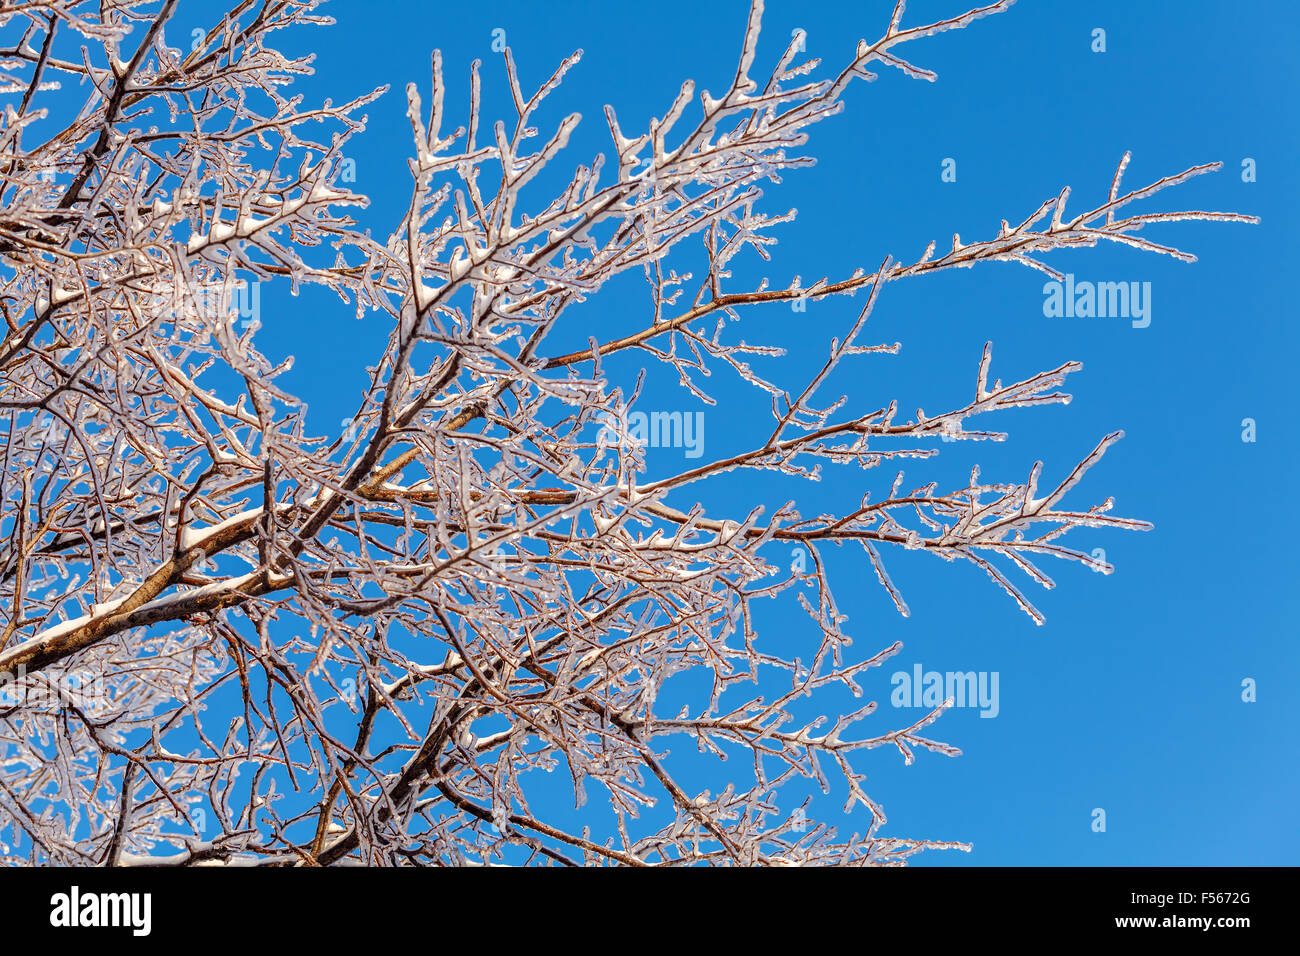 Frozen Branches of Tree after Icy Rain Stock Photo